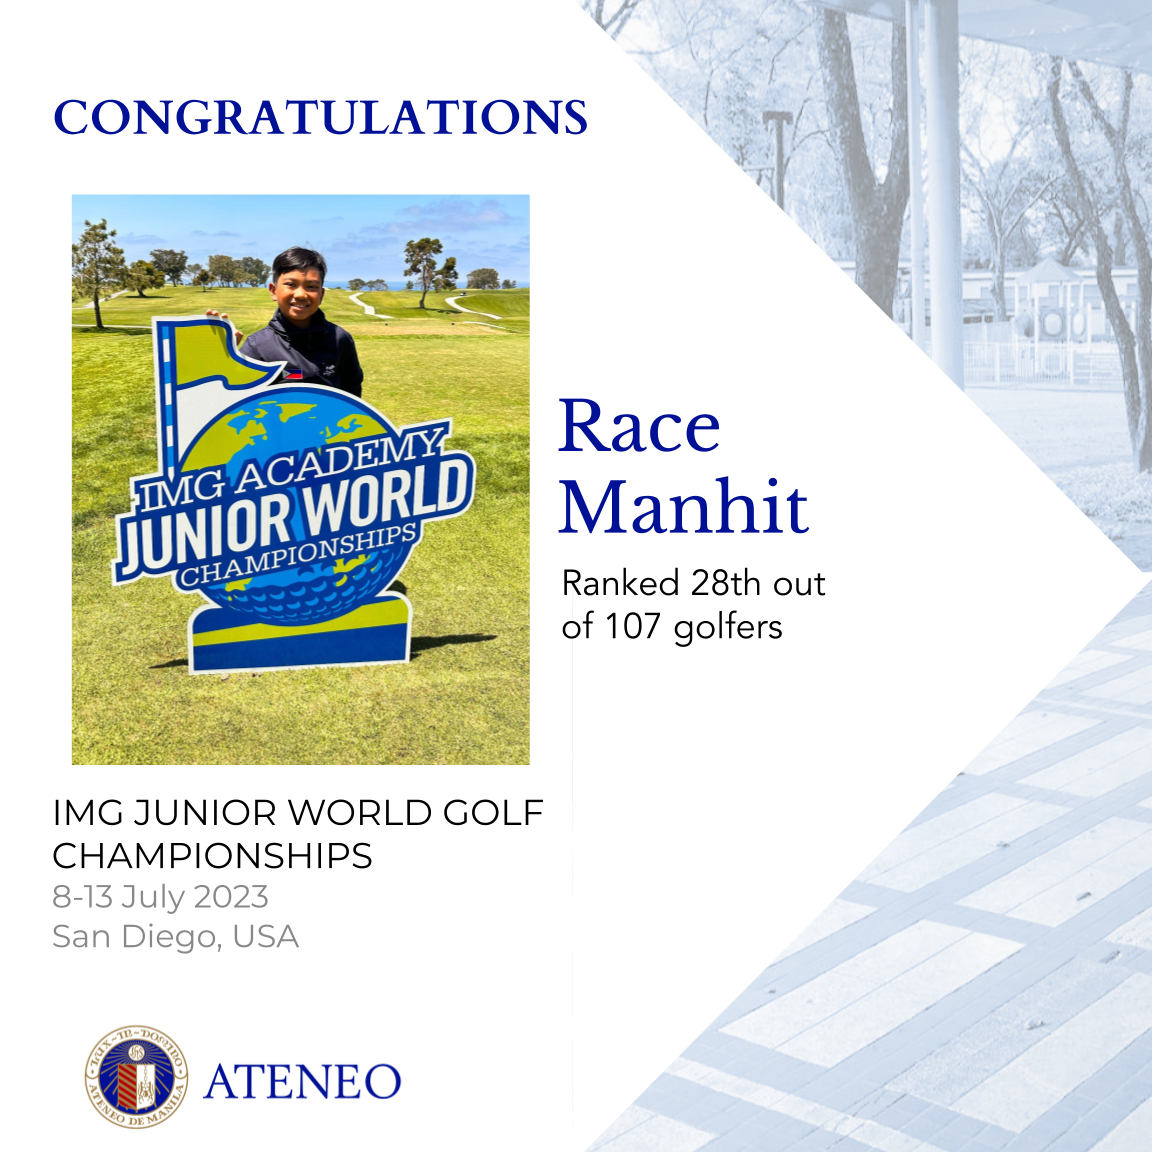 Race Manhit in San Diego for the 2023 IMG Junior World Golf Championships